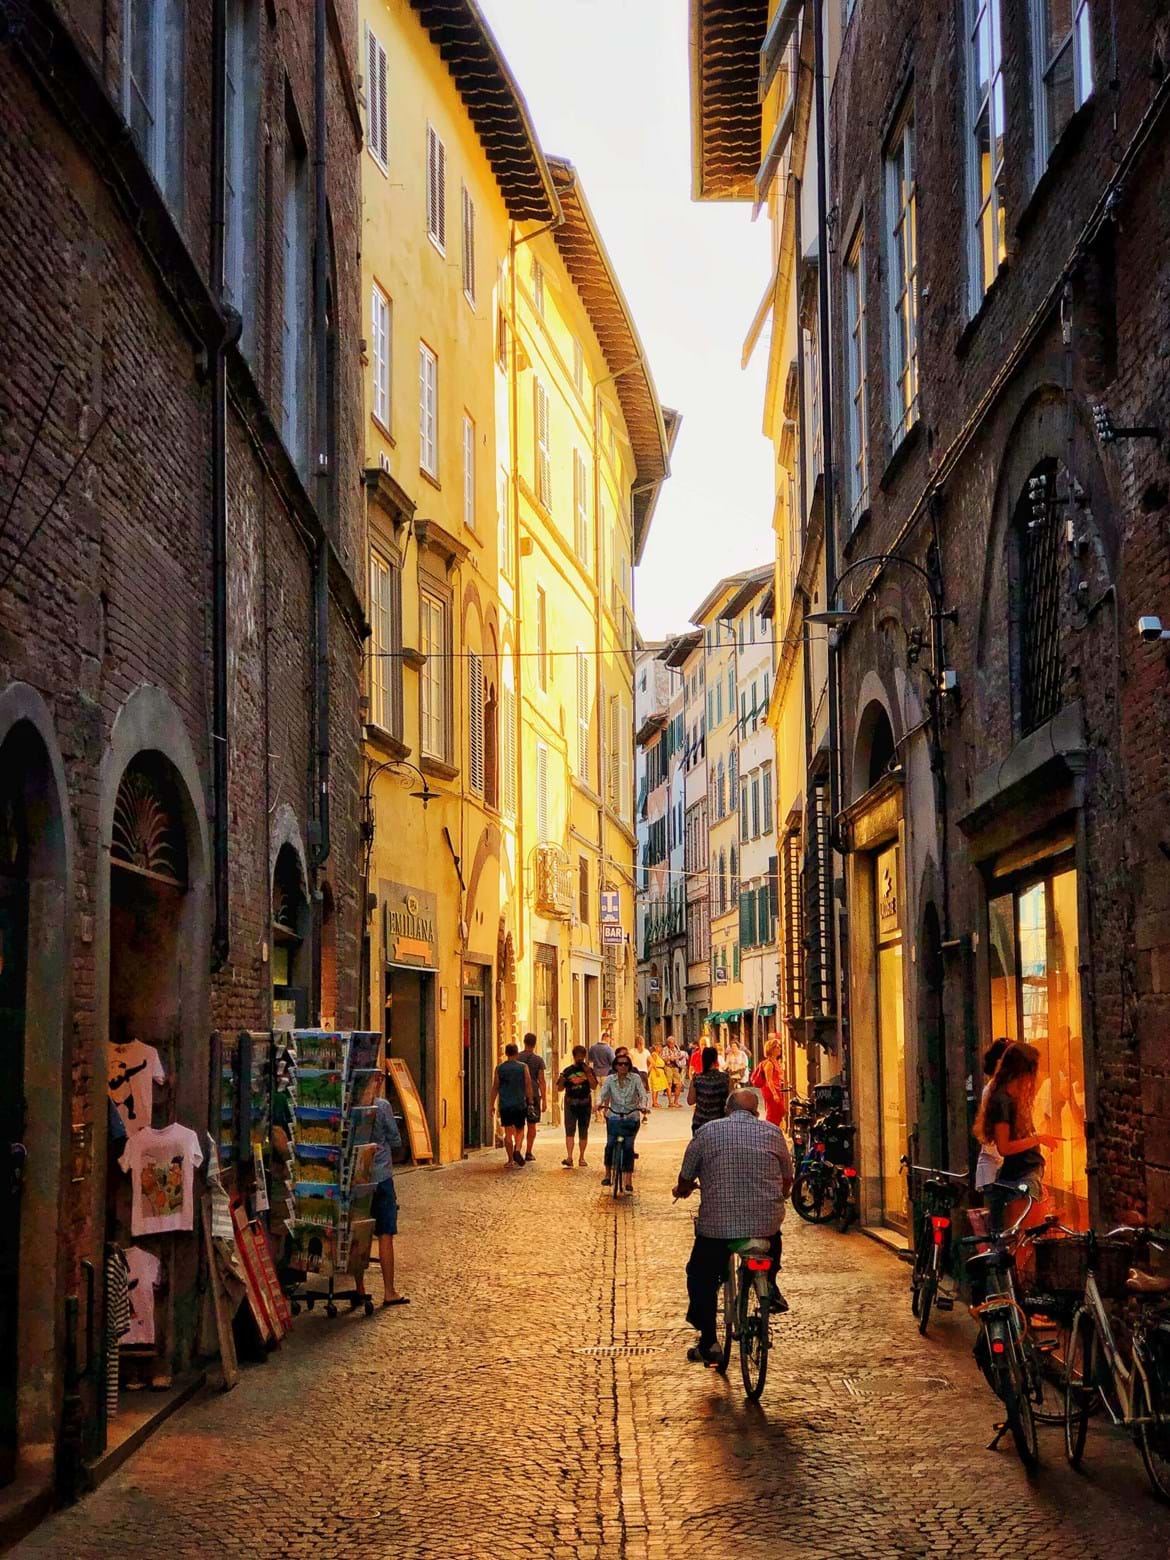 25/1 - The Streets of Lucca